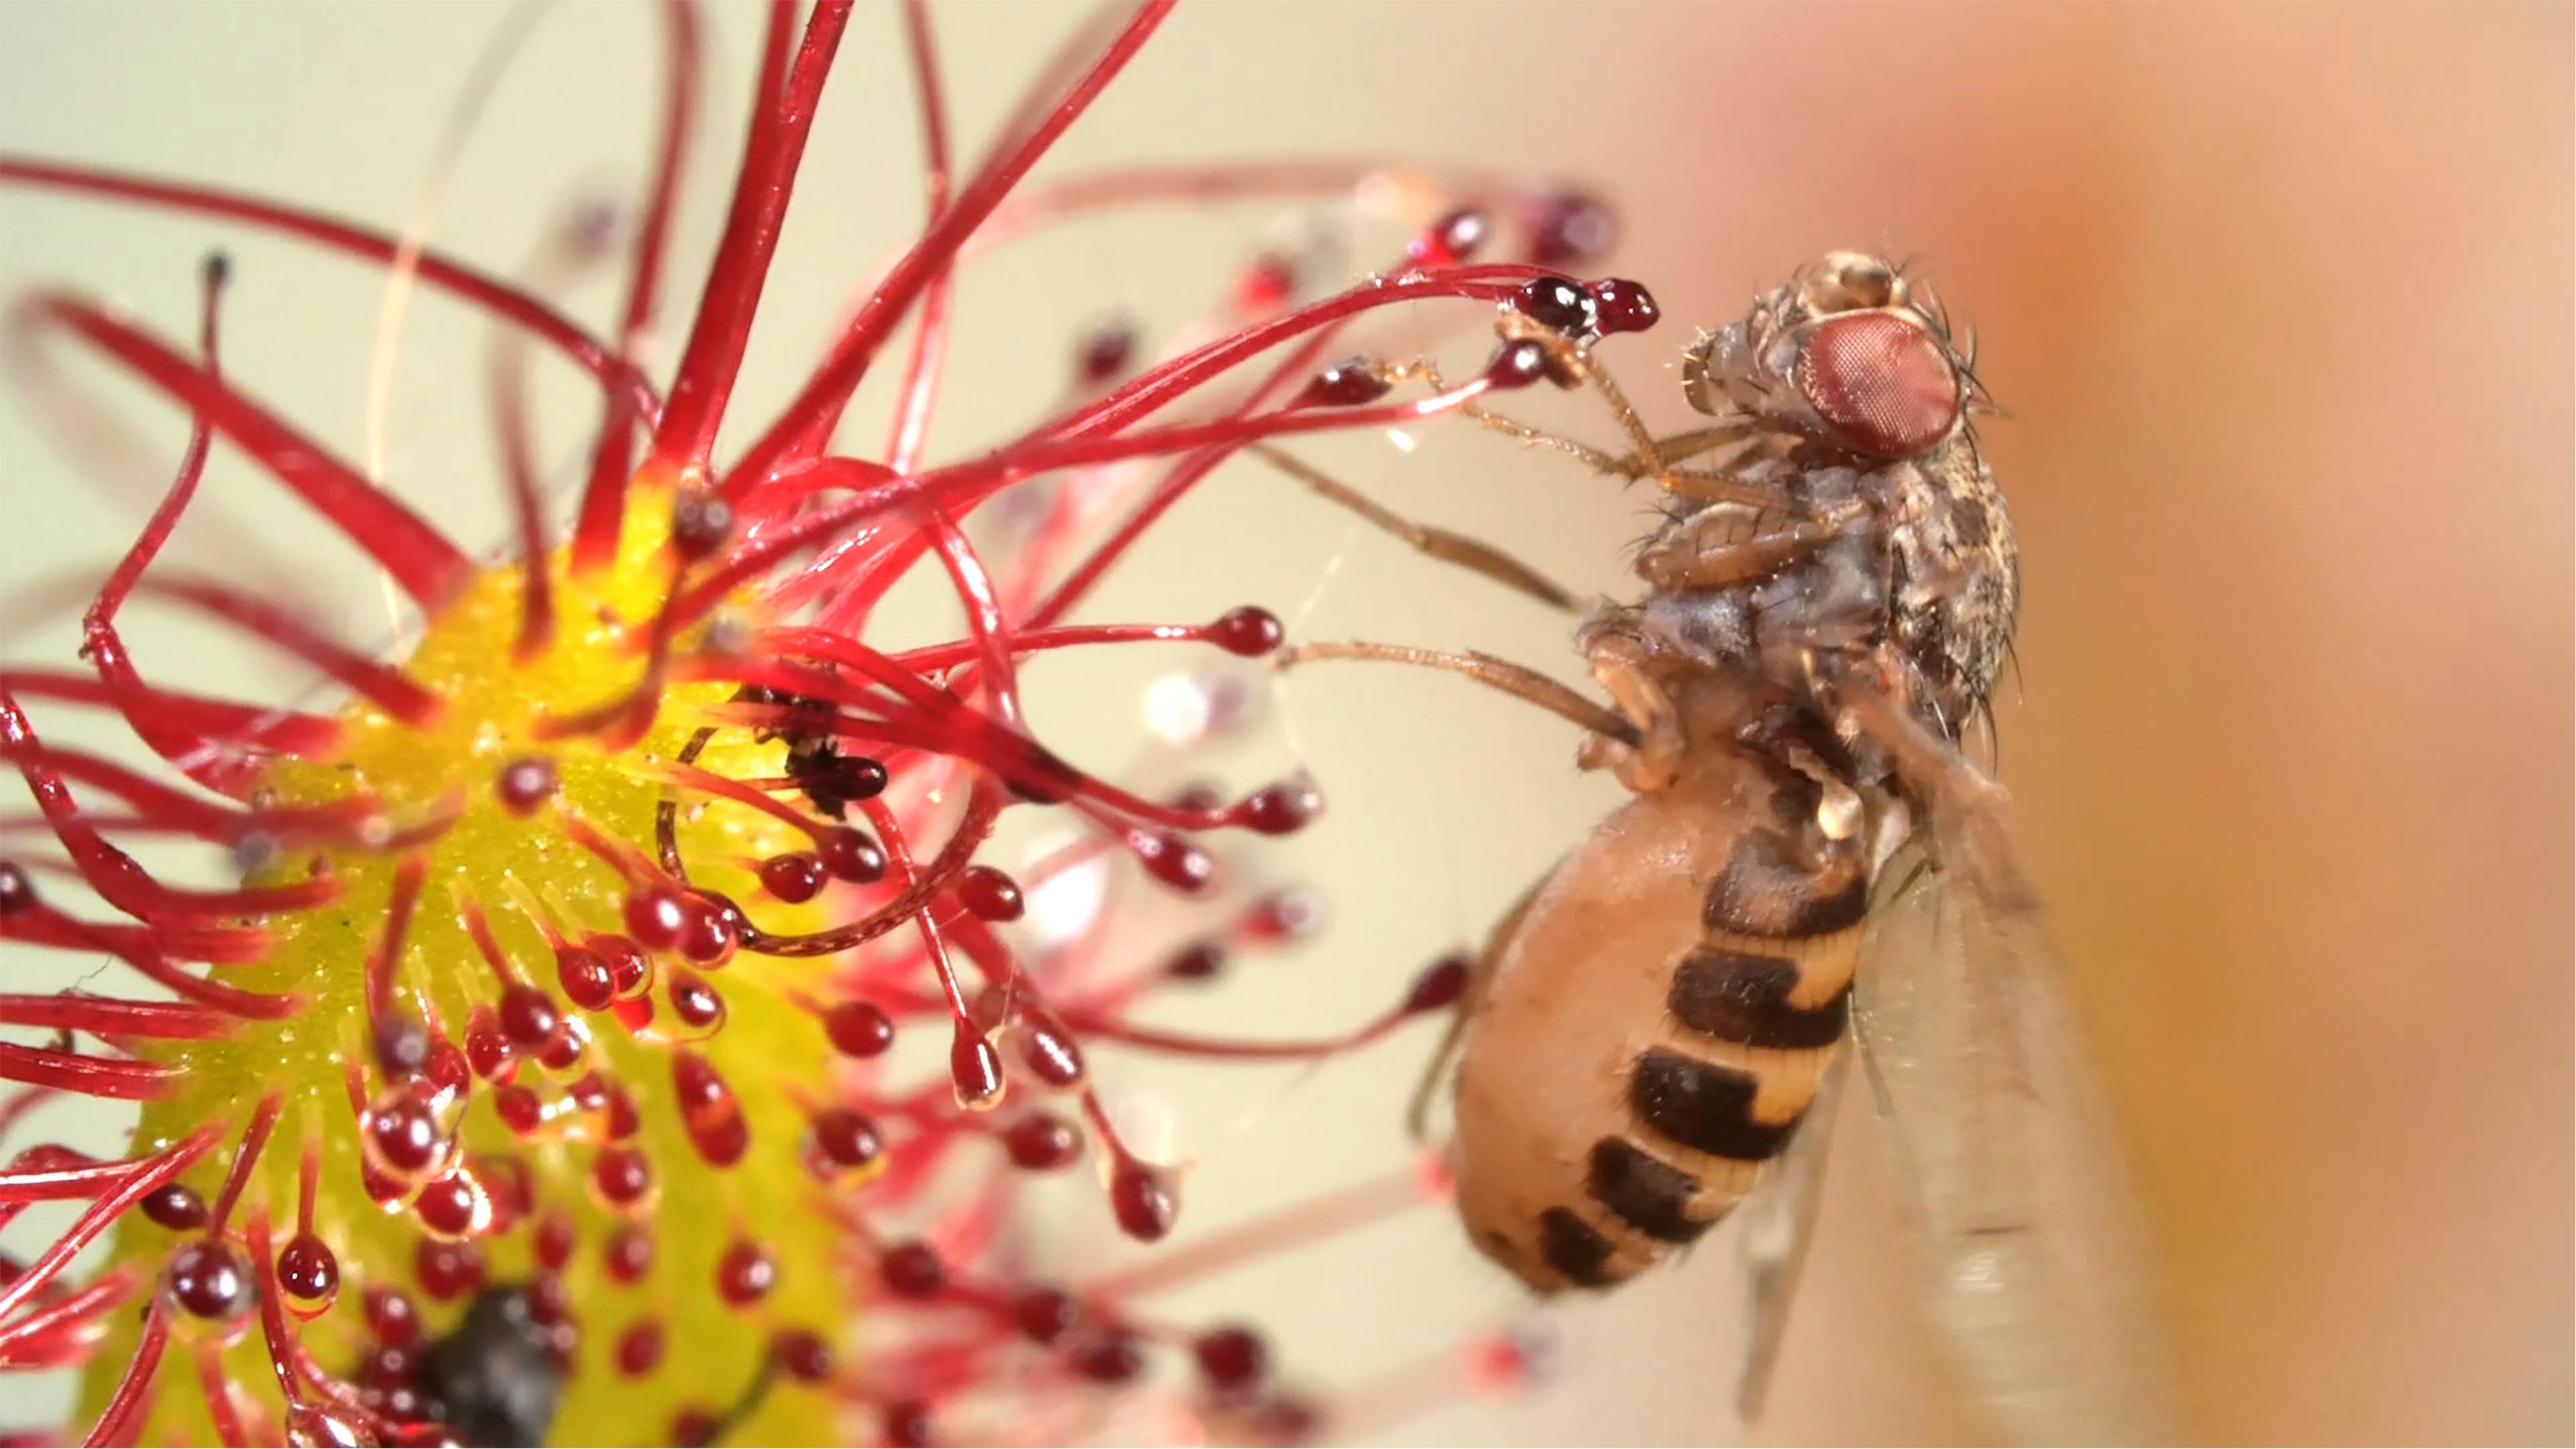 sundew eating insects